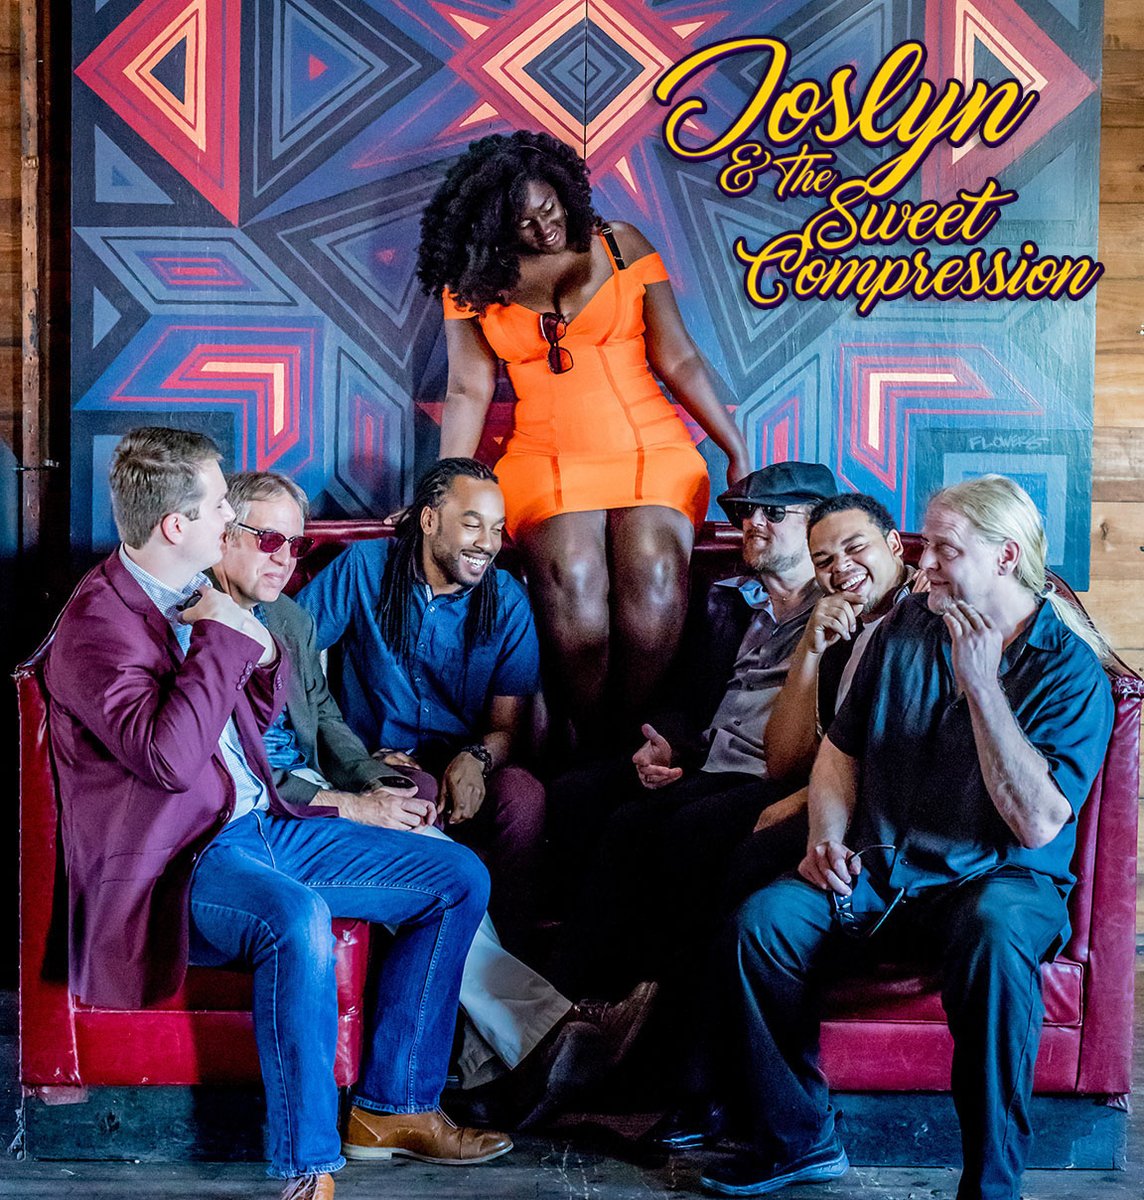 SATURDAY ☆ MAY 11th Crawfish Festival! 12:00P - 11:00P All Roostered Up, 12:00P - 3:00P, Free Show! Joslyn & The Sweet Compression, 9:00P - 12:00A, $15 Cover #BroadwayOysterBar #LeaveYourAttitudeAtHome #STLeats #FoodFestival